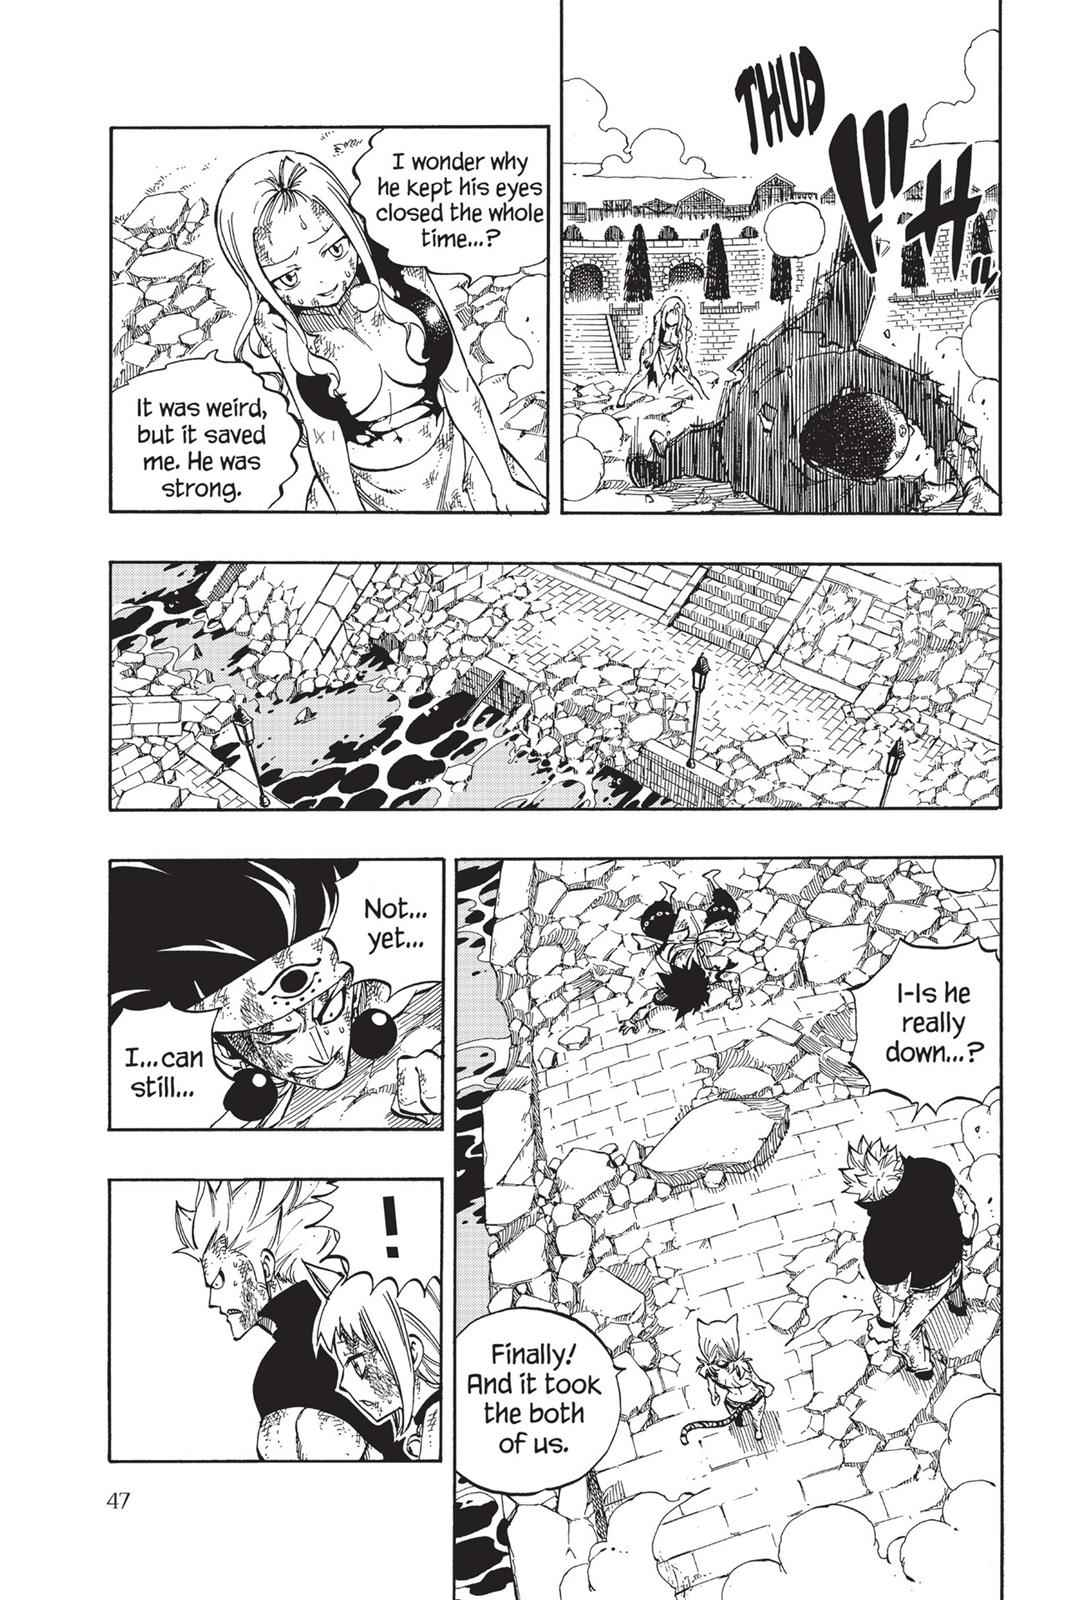  Chapter 521 image 005